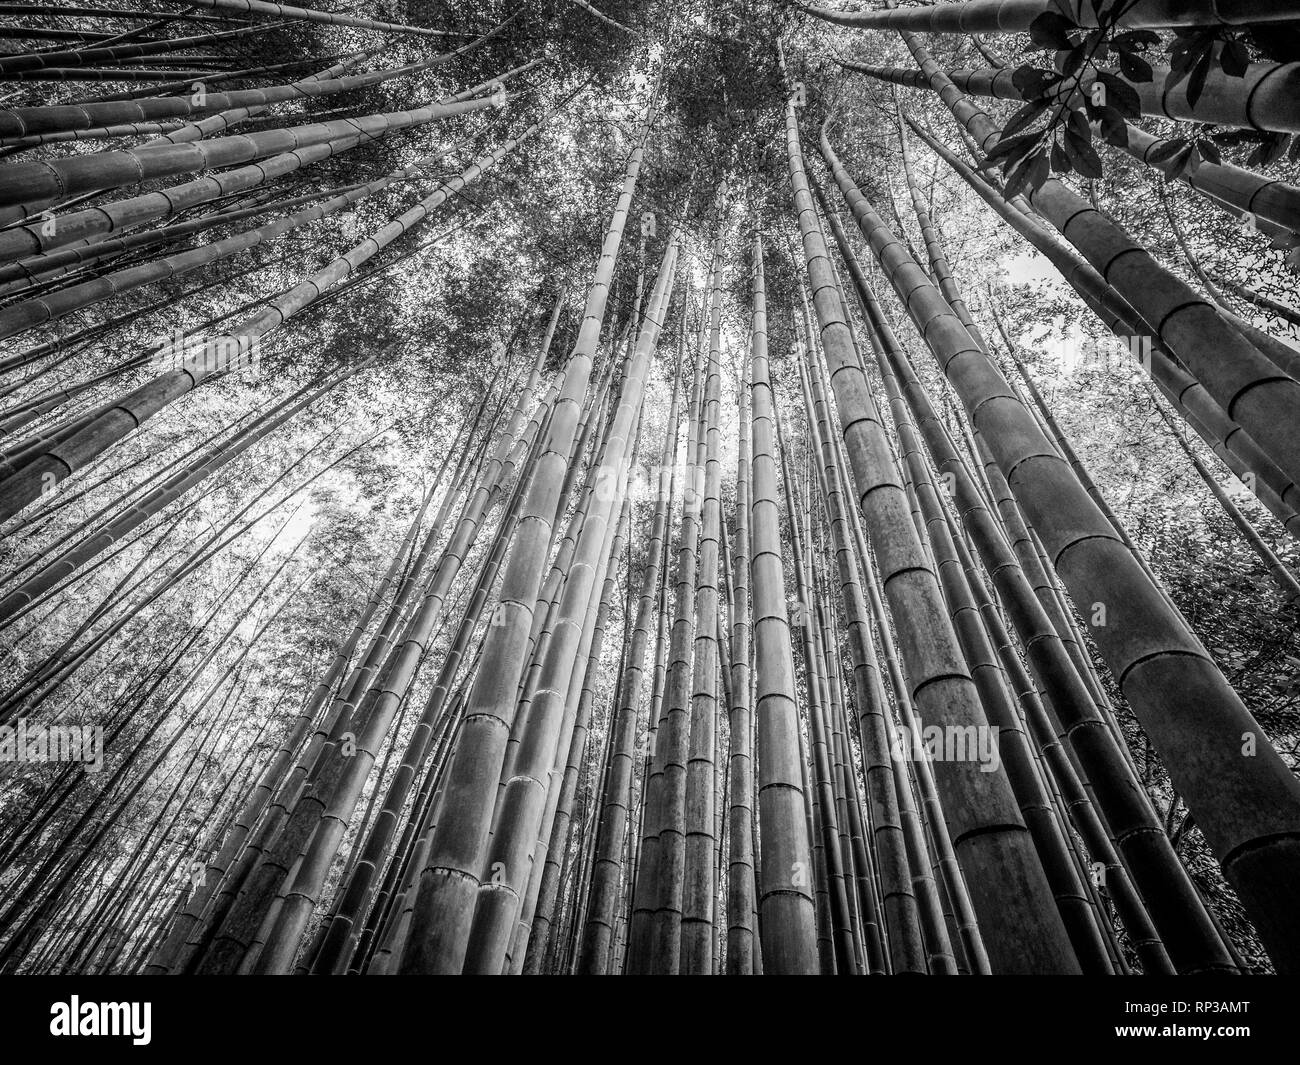 Tall Bamboo trees in an Japanese Forest Stock Photo - Alamy